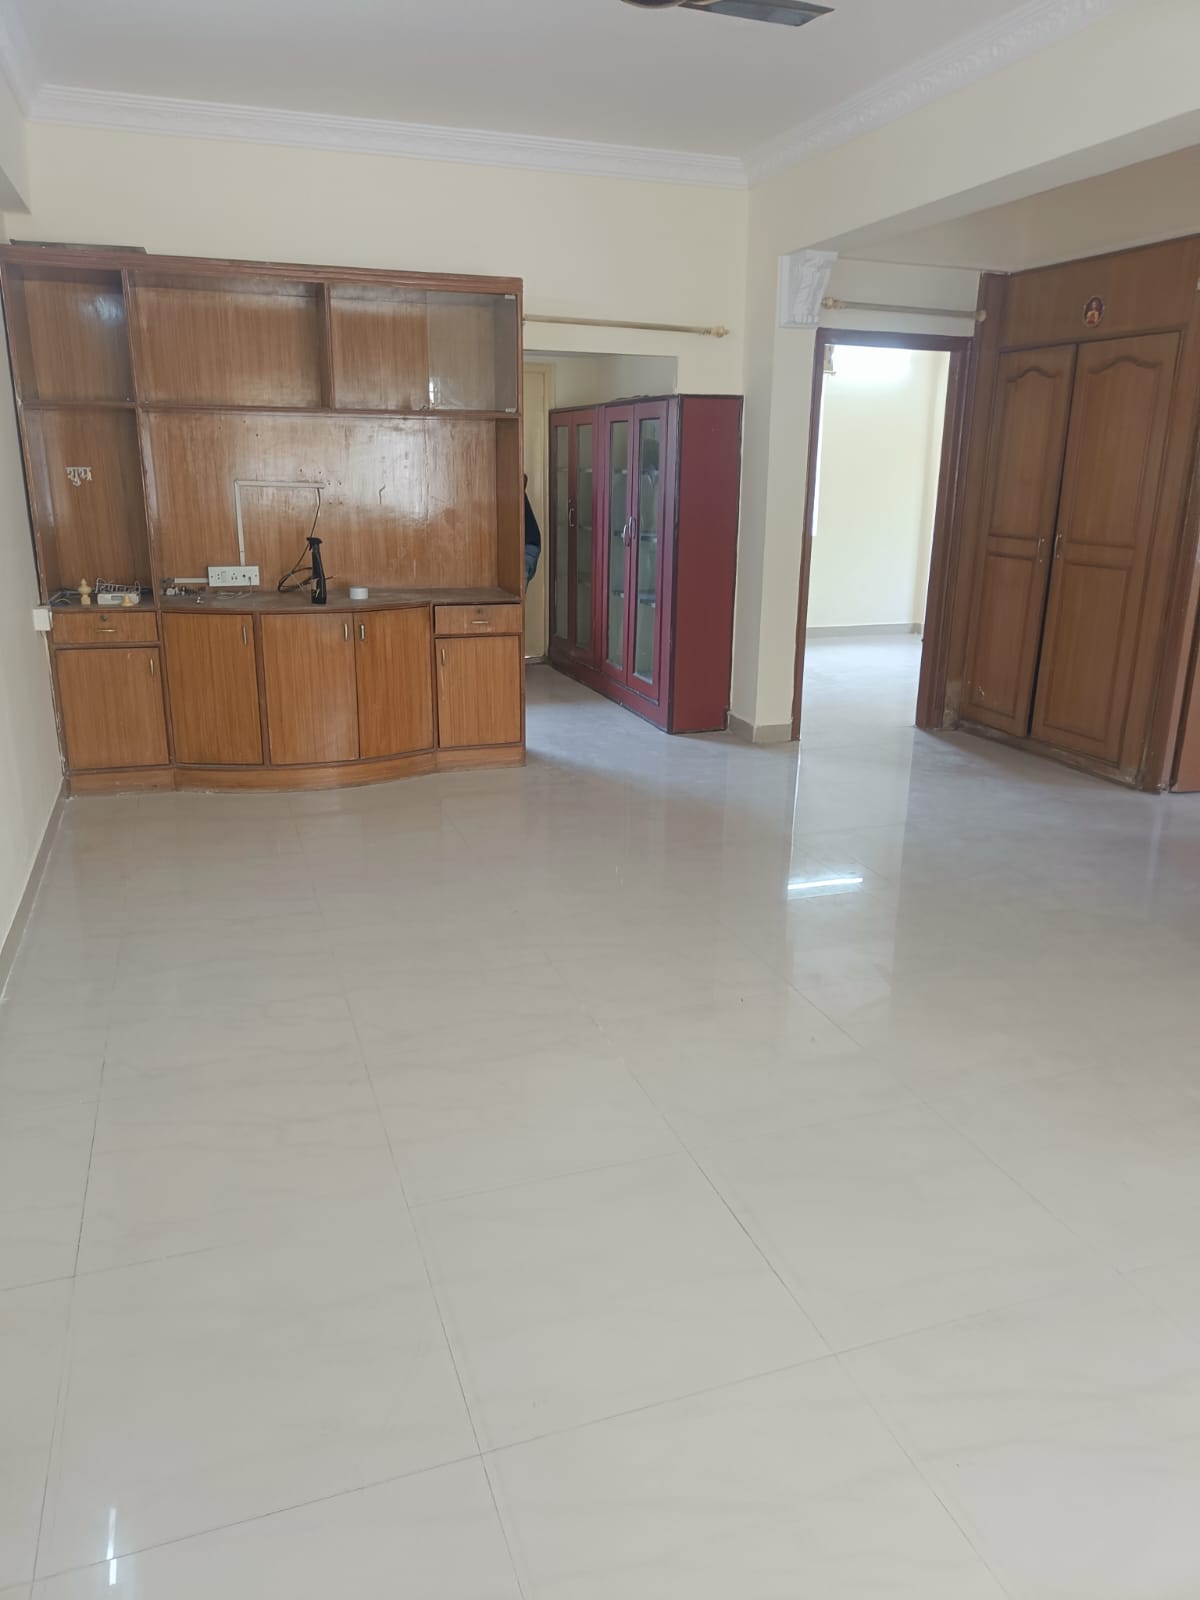 2 BHK Residential Apartment for Lease Only at JAML2 - 4493 in Lingarajapuram